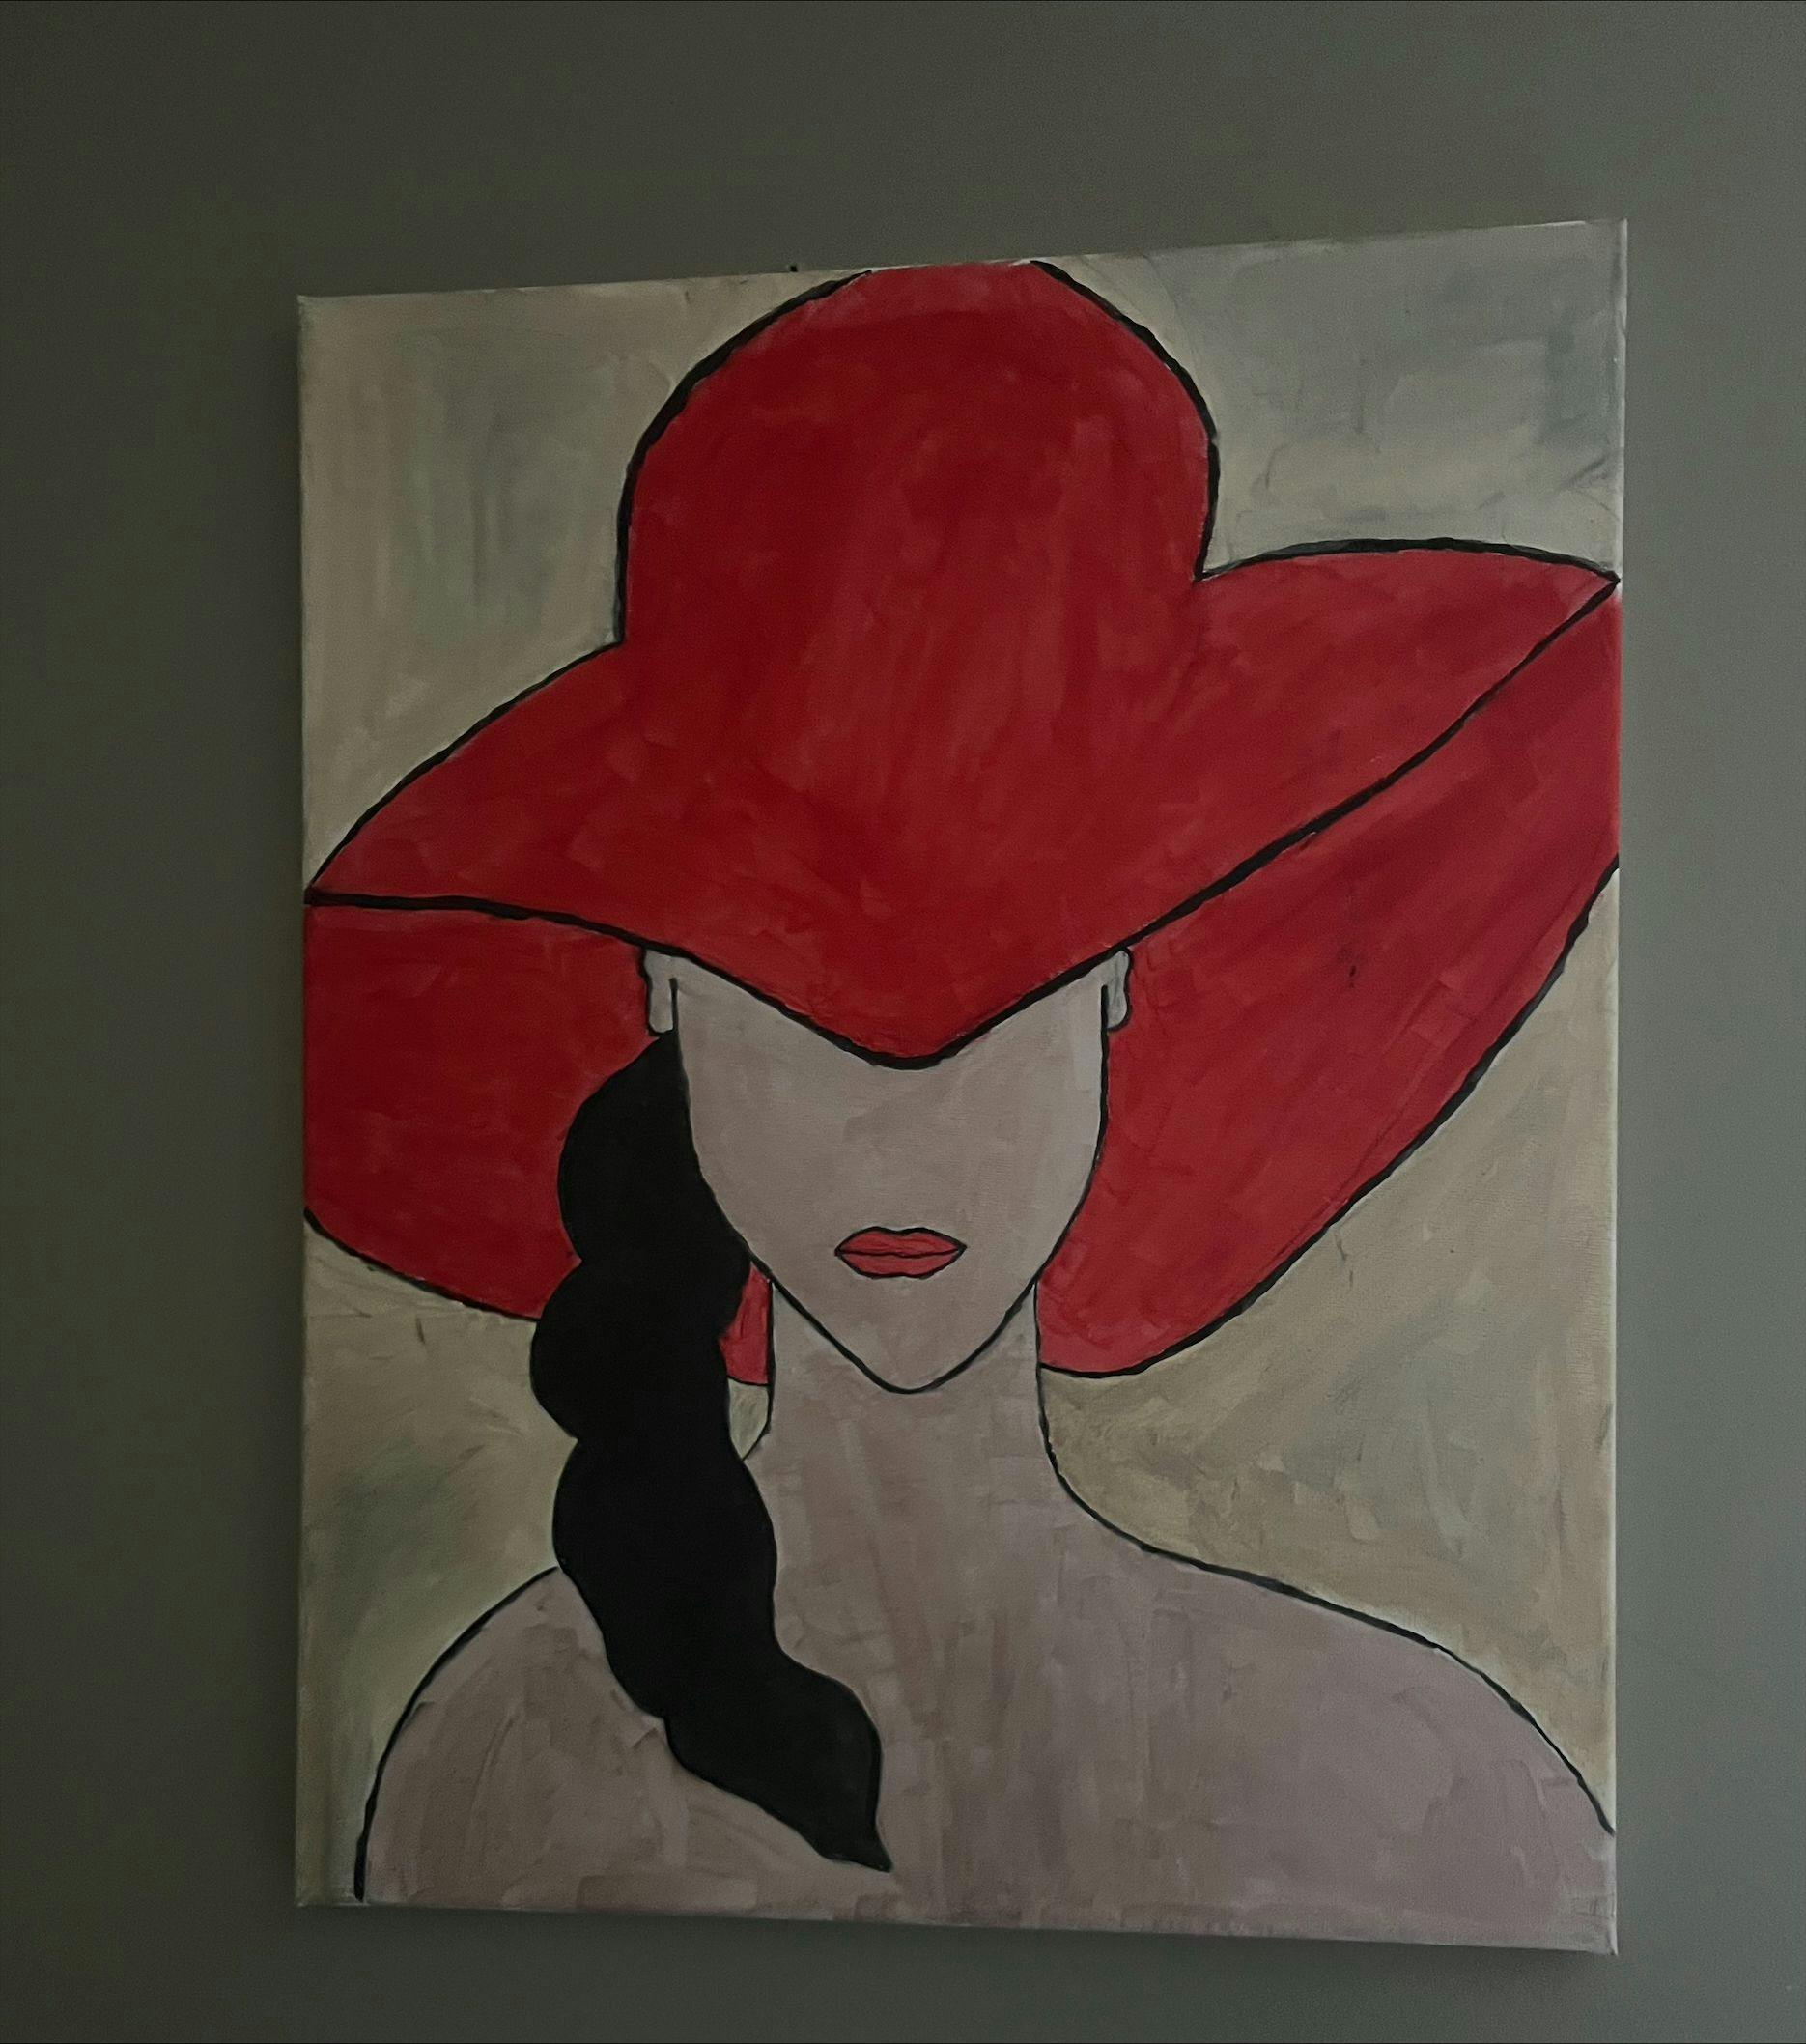 One of Taylor's paintings